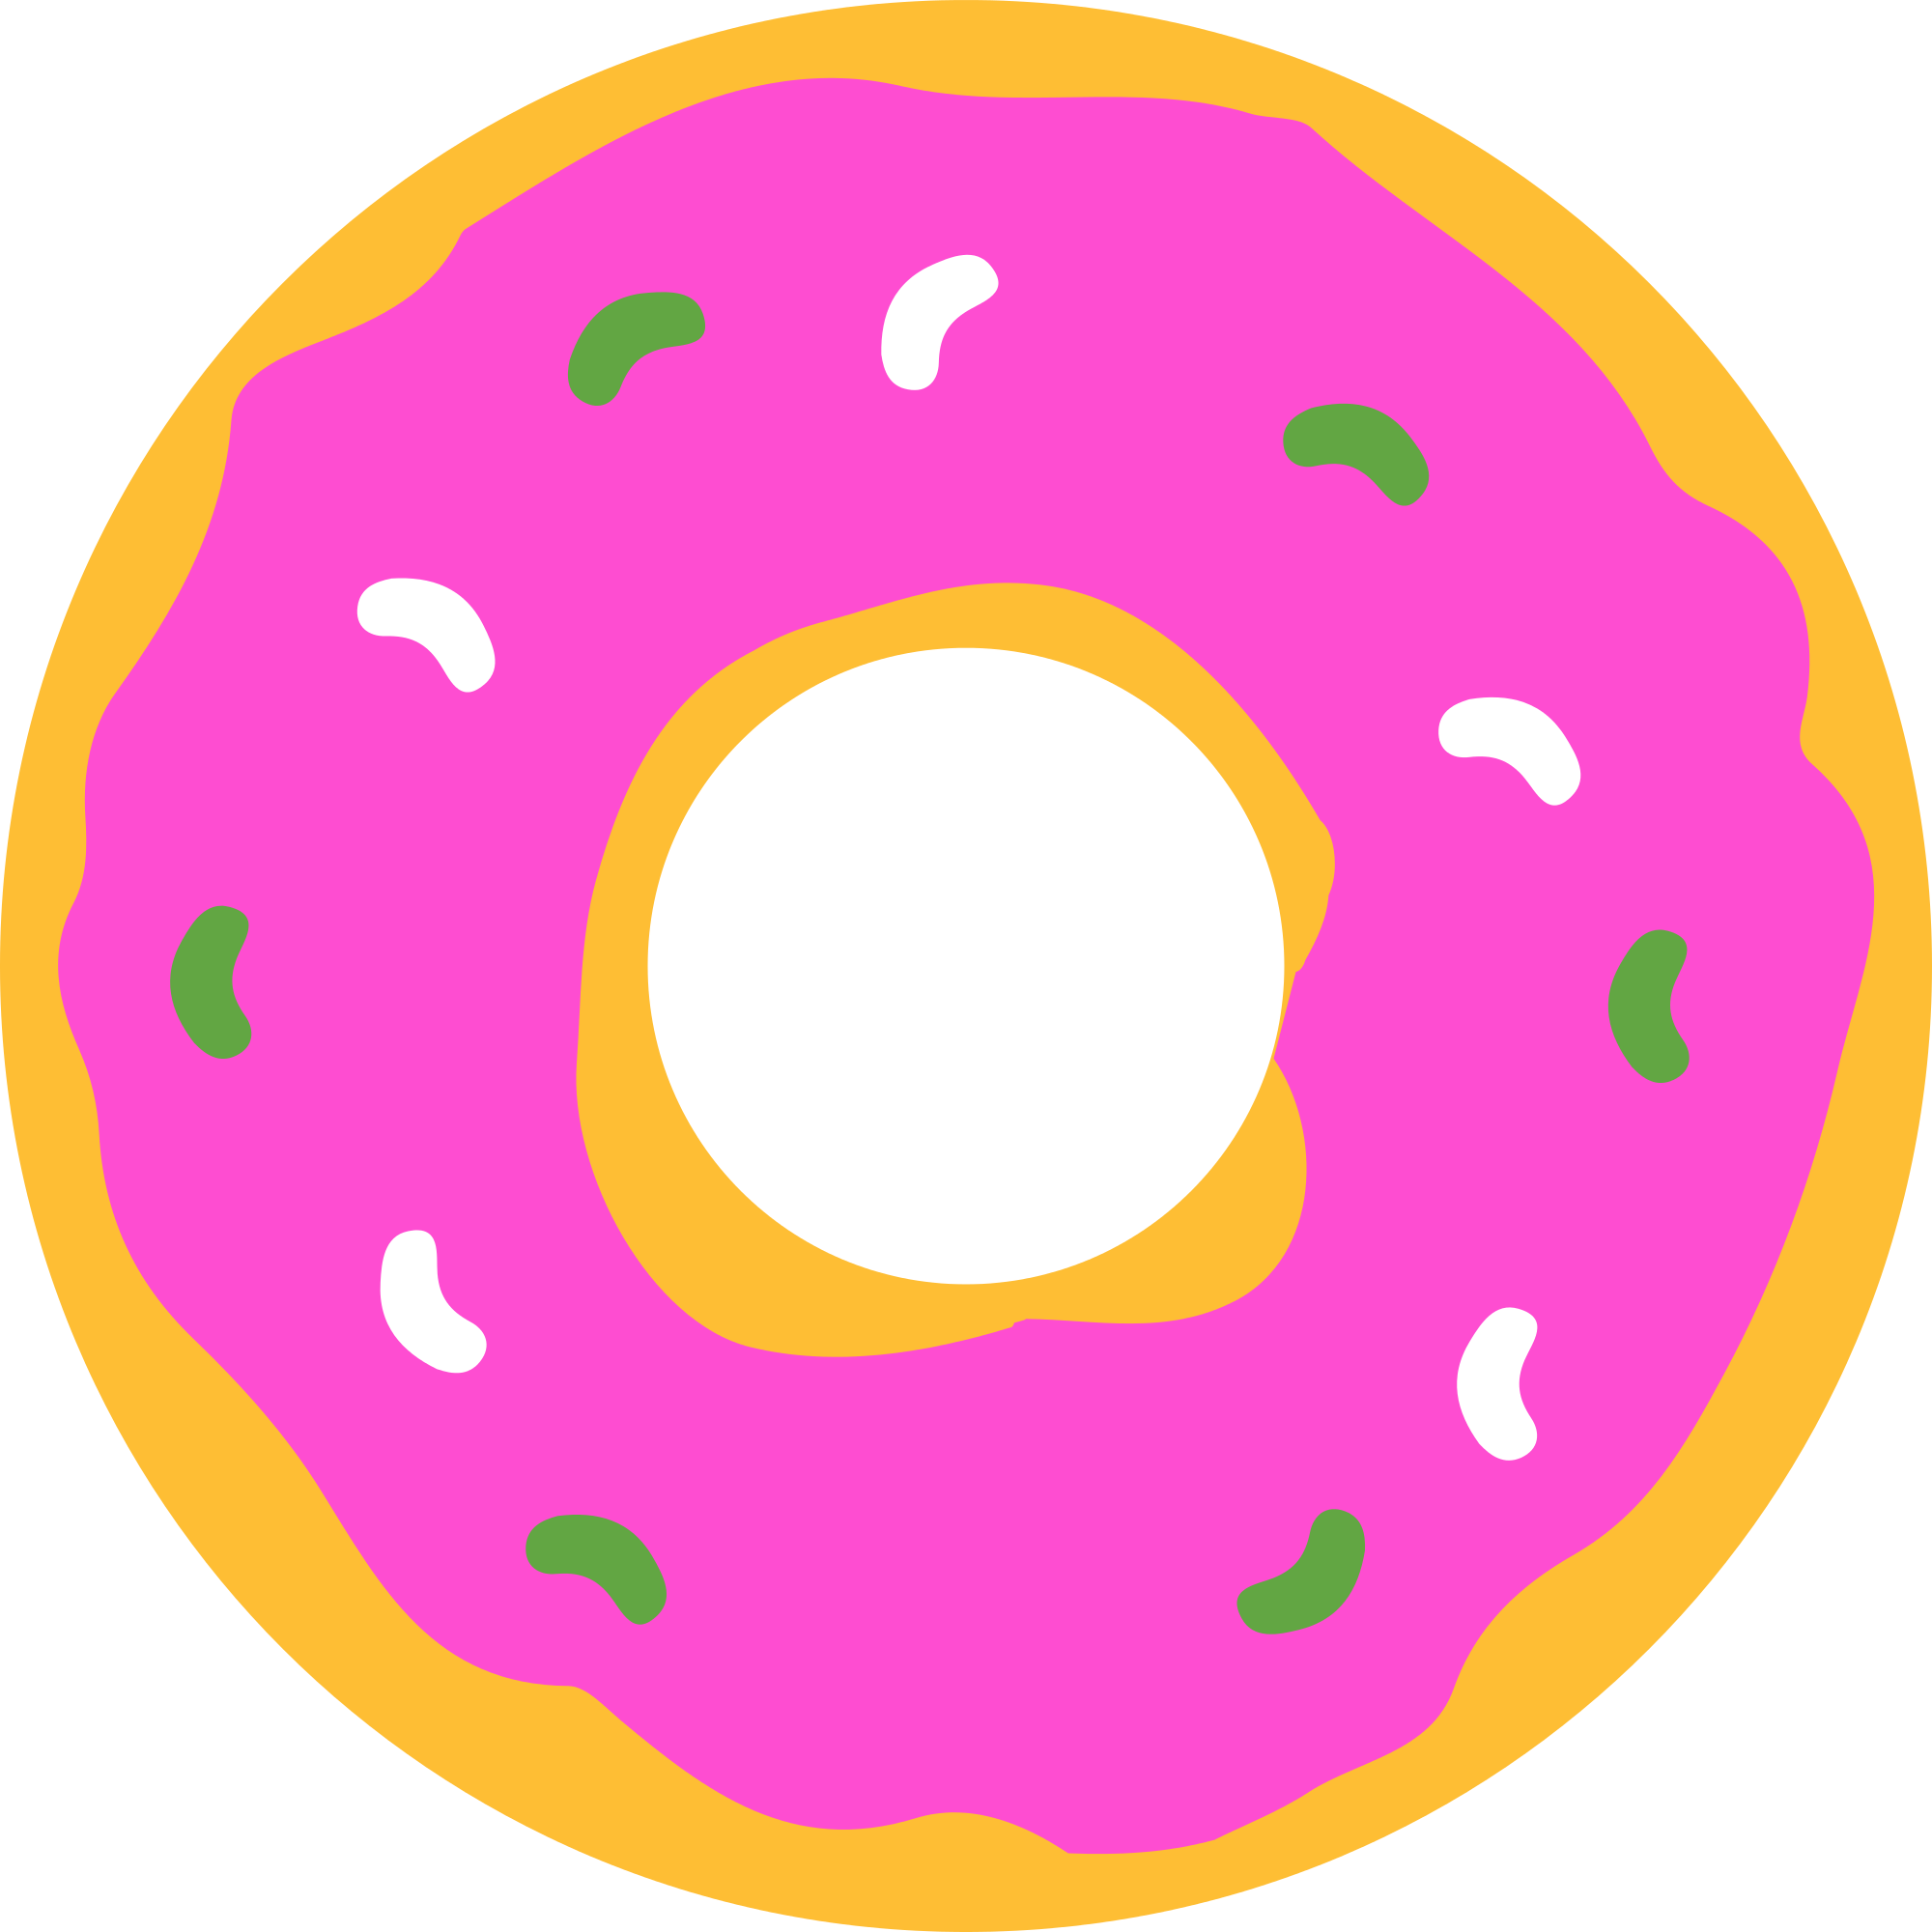 Donuts clipart small. Donut doughnut png images